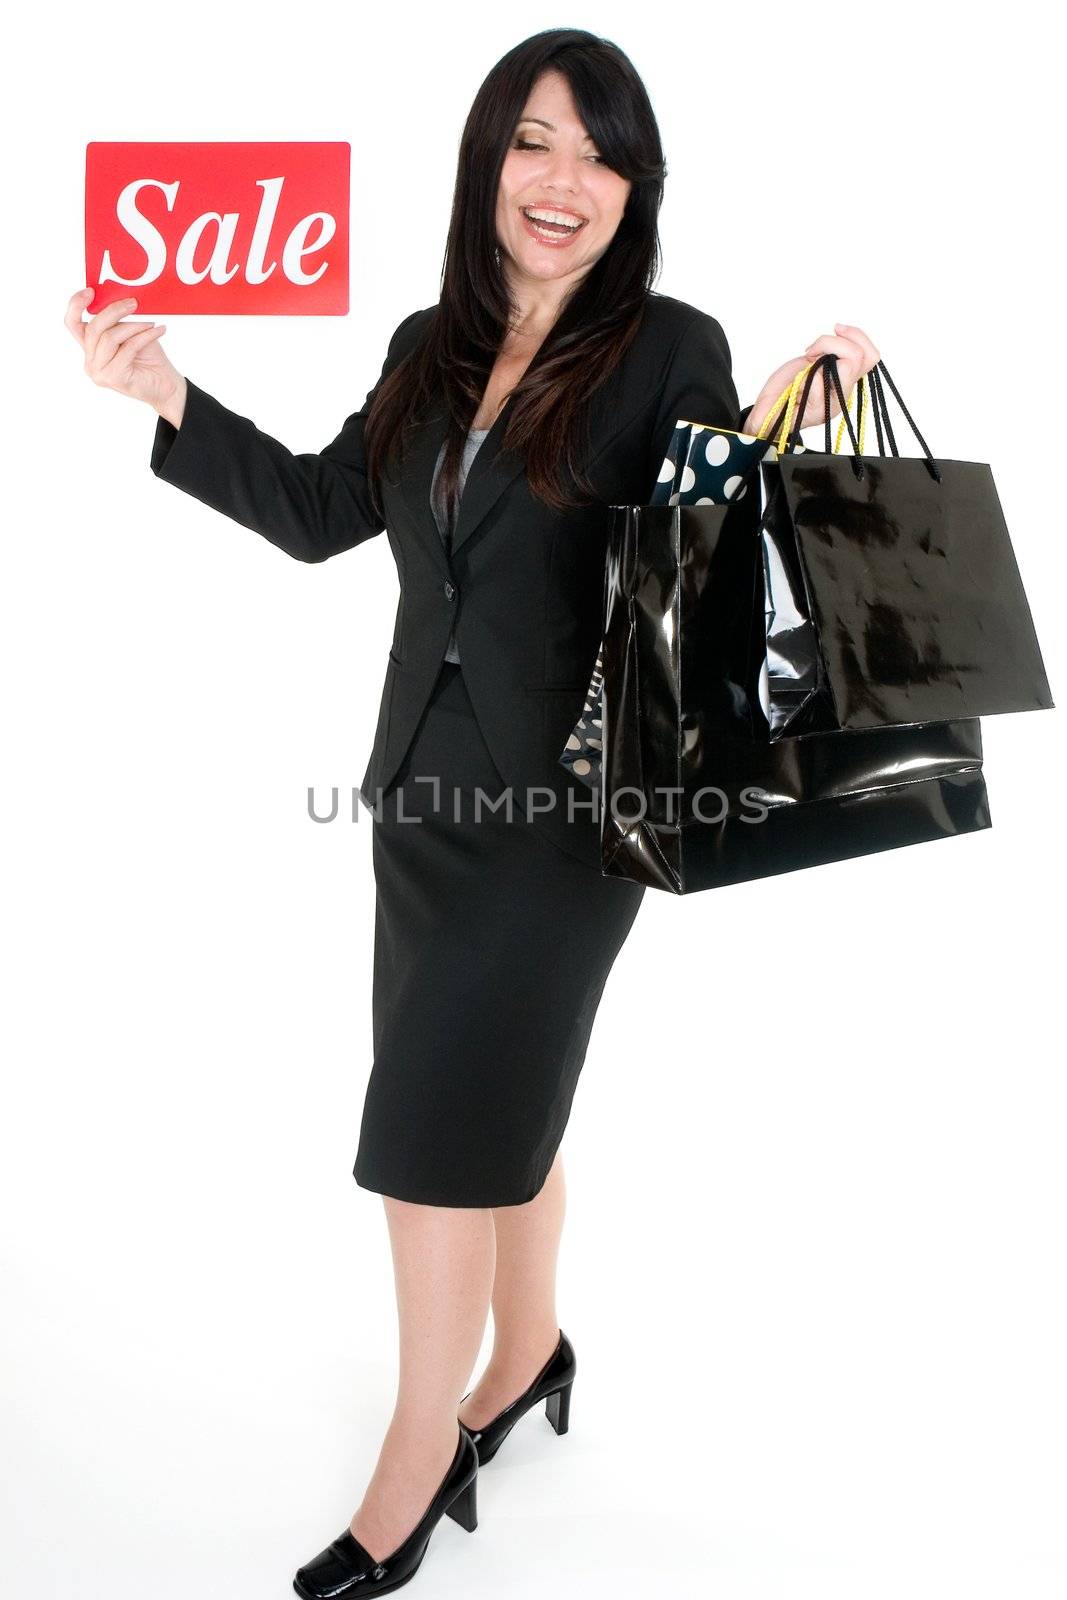 Its Sale Time - Woman with shopping bags by lovleah